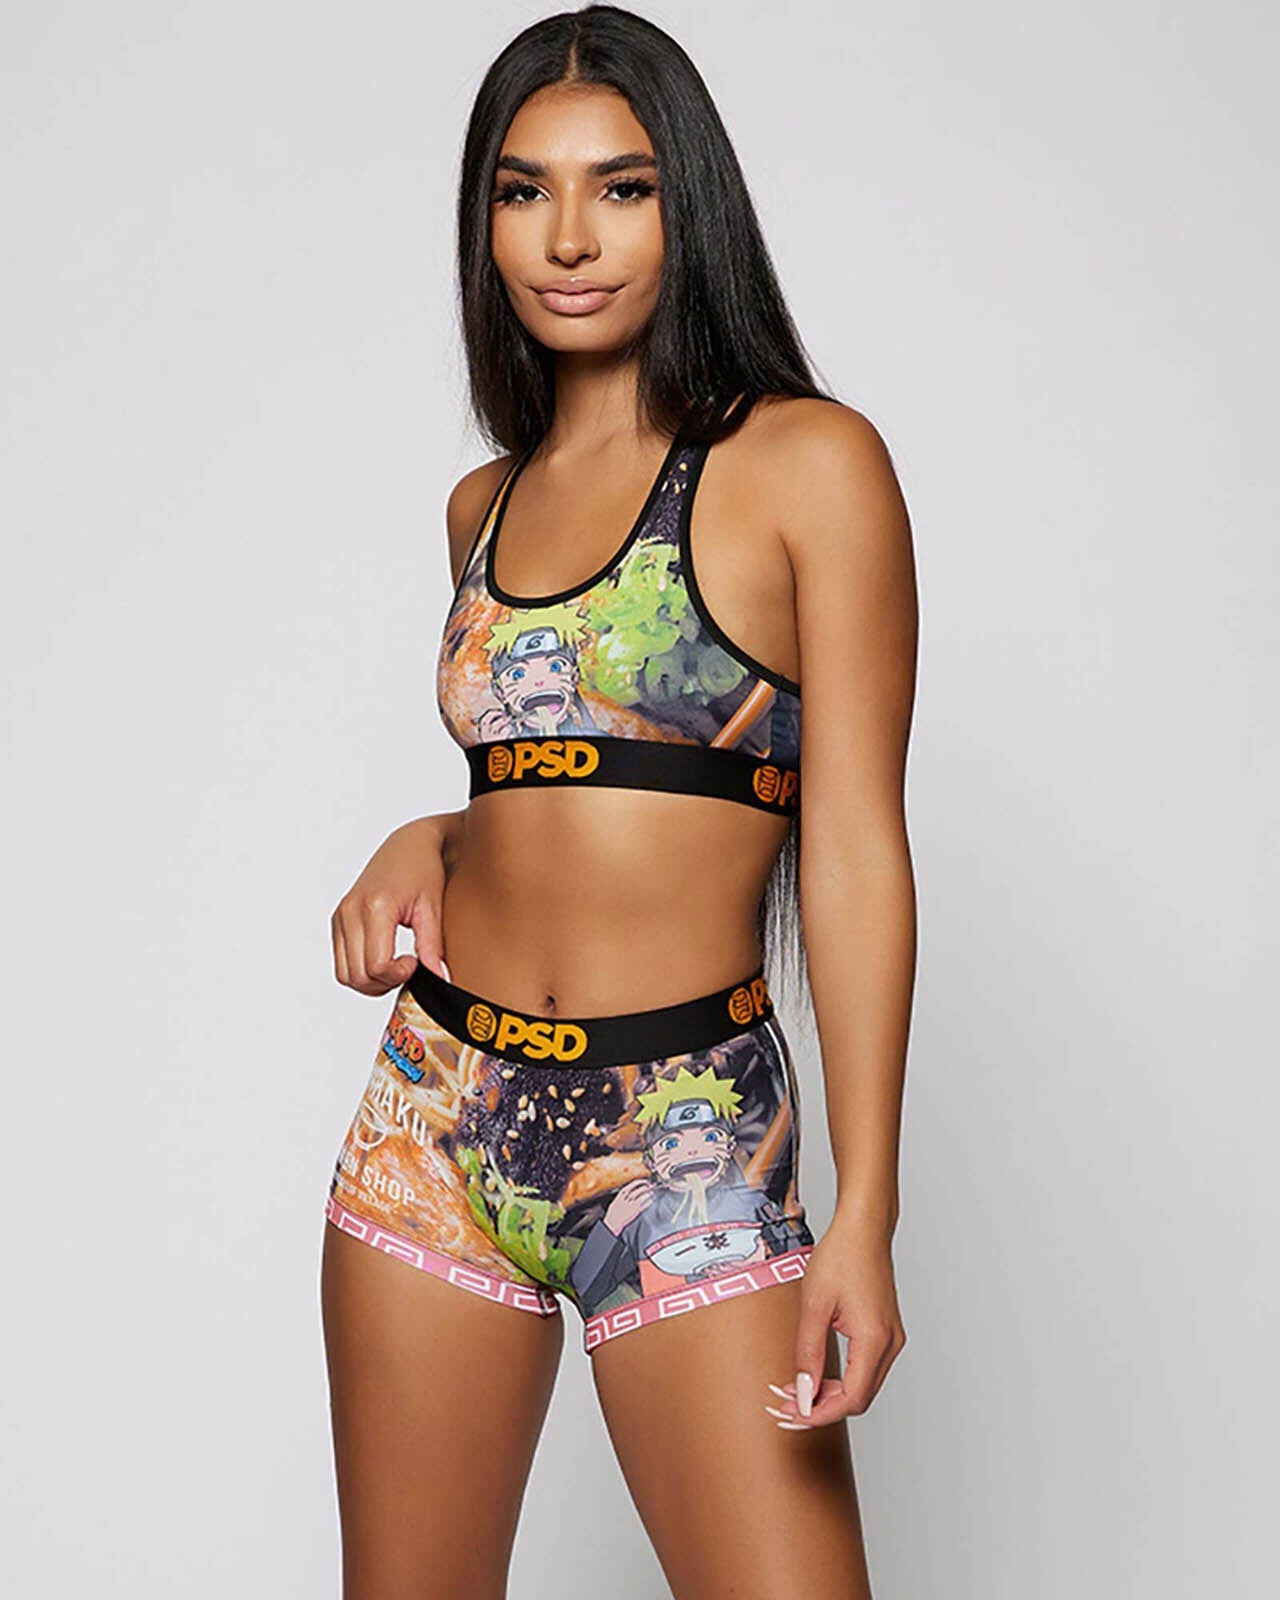 PSD Underwear Adds Yu-Gi-Oh! Sports Bras, Boy Shorts | in the name of the  pharaoh | by ravegrl